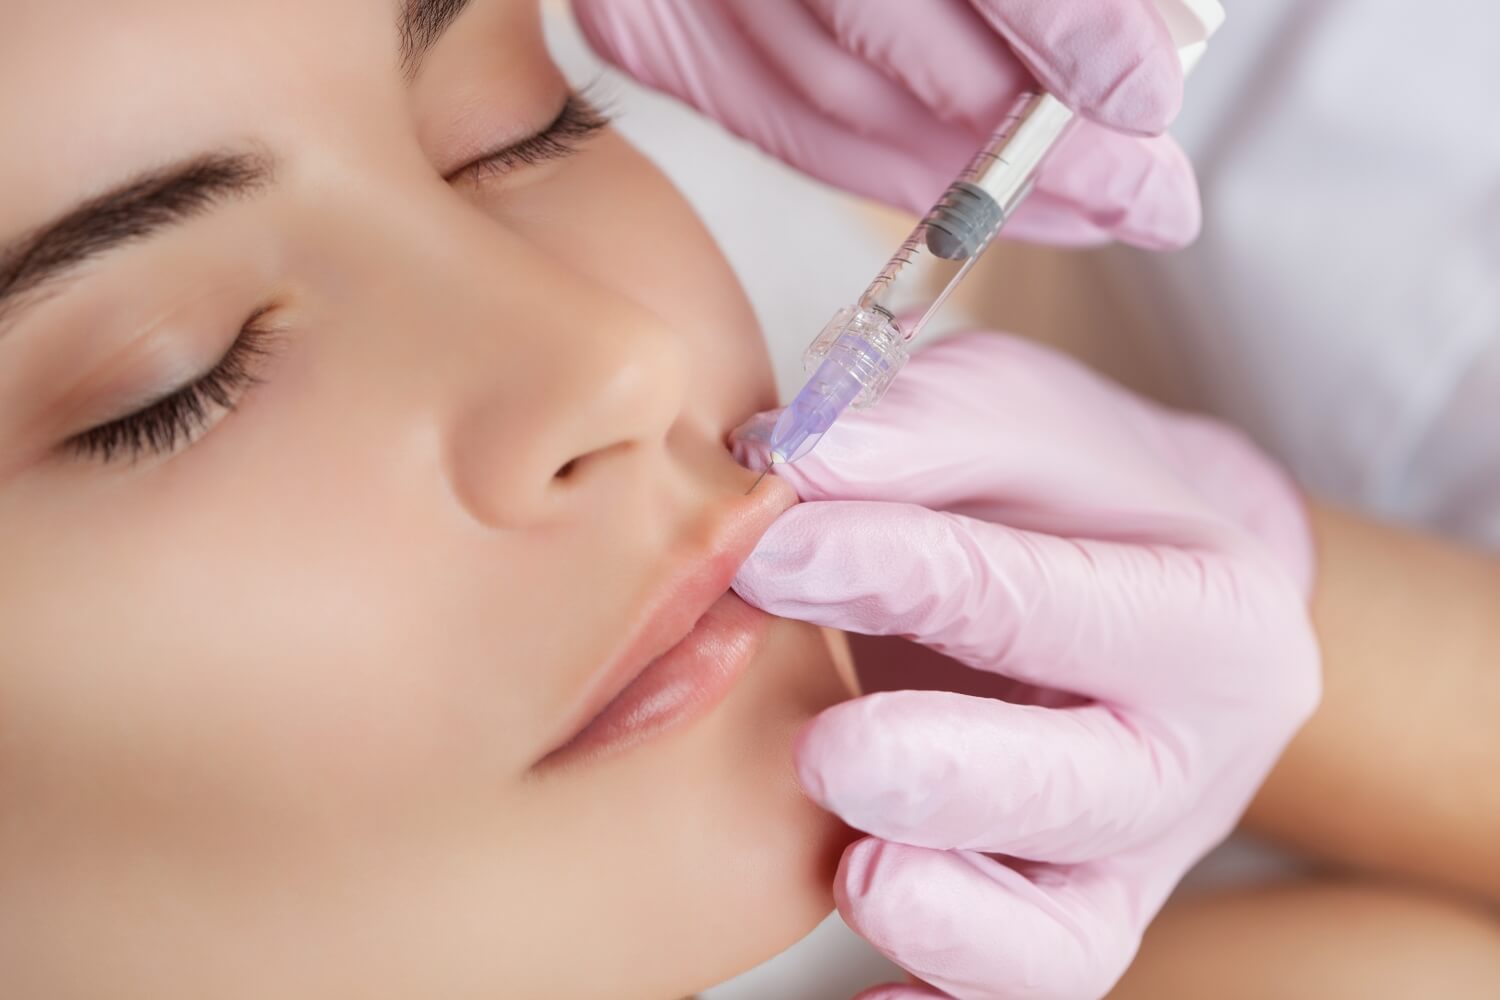 Is Botox Treatment Safe? What Side Effects Should You Expect?